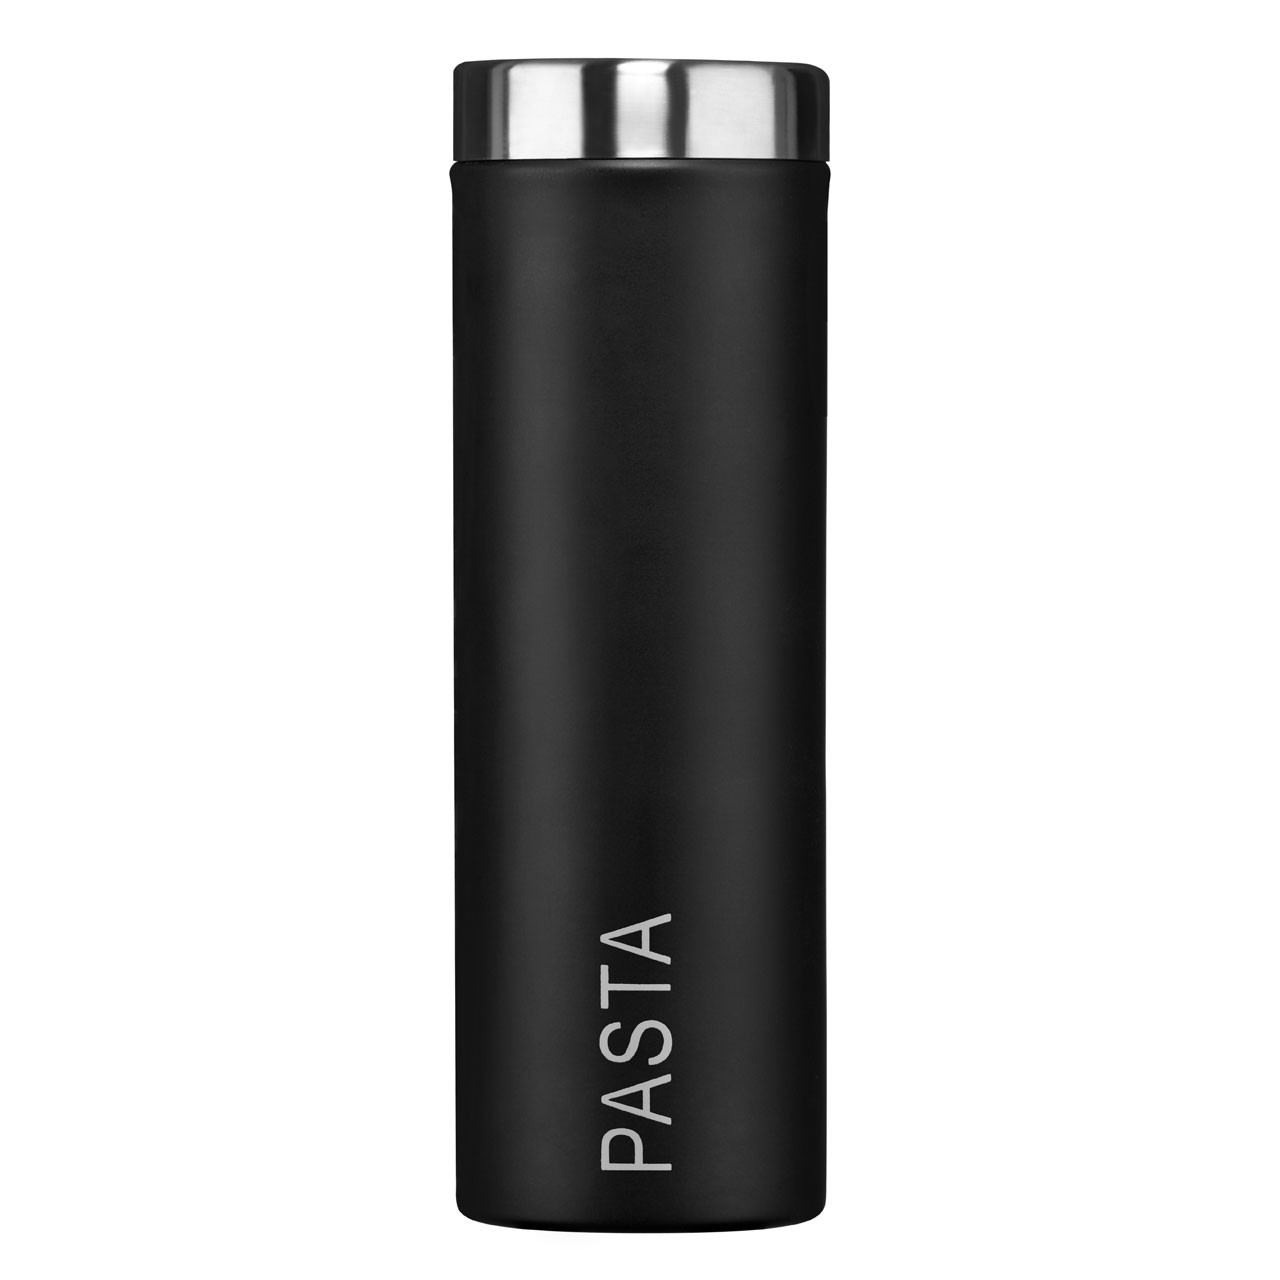 Liberty Pasta Canister - Black